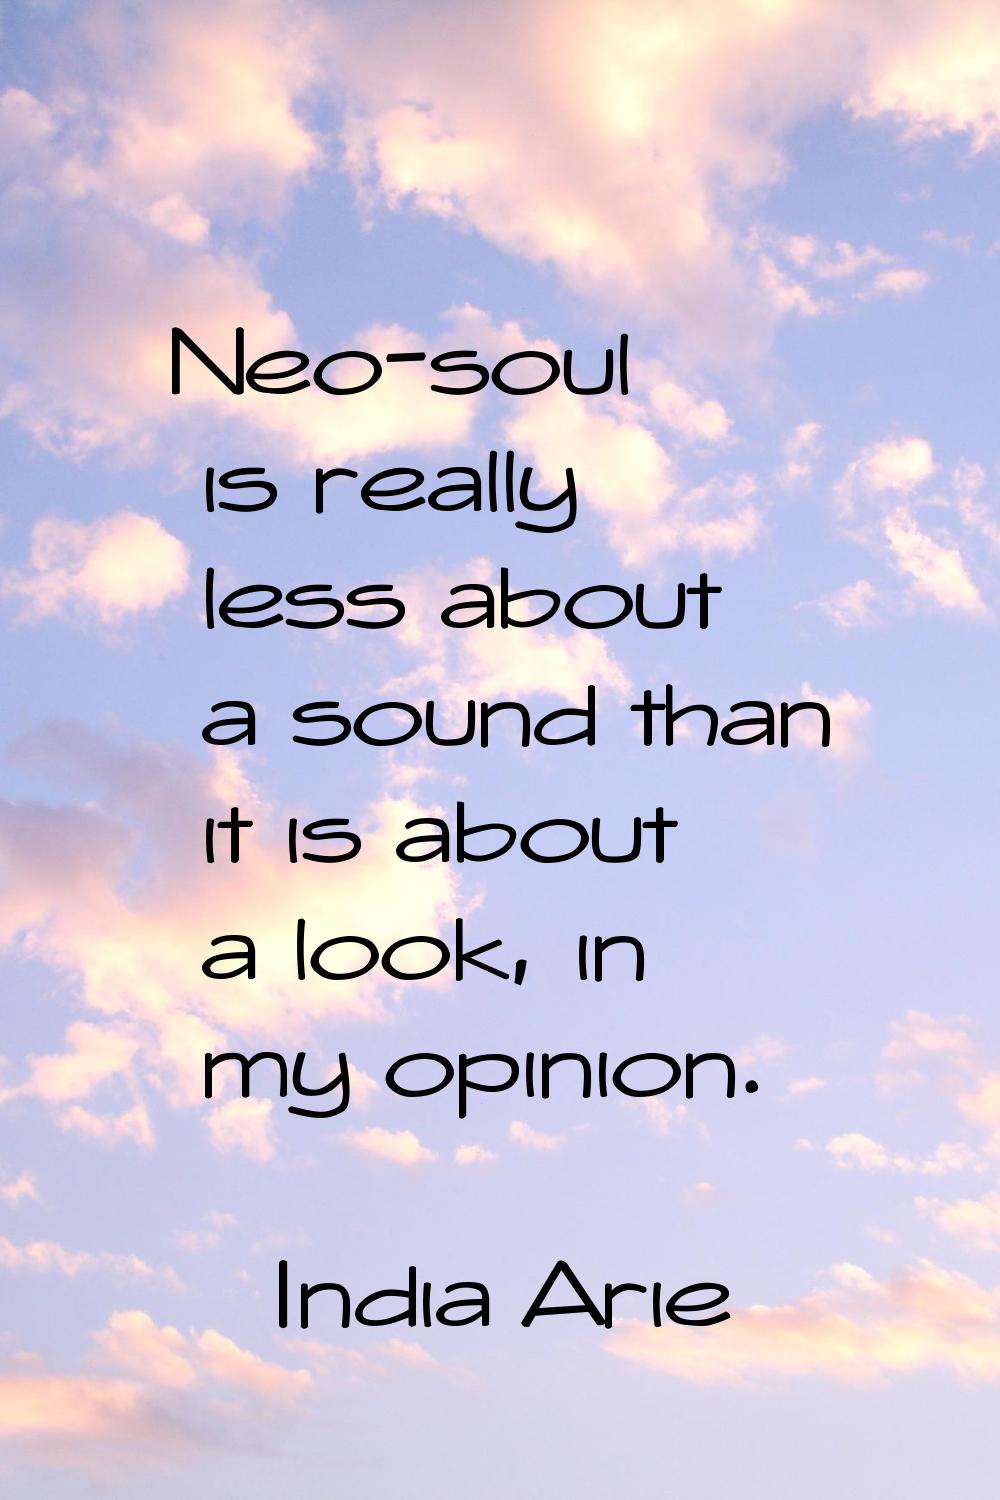 Neo-soul is really less about a sound than it is about a look, in my opinion.